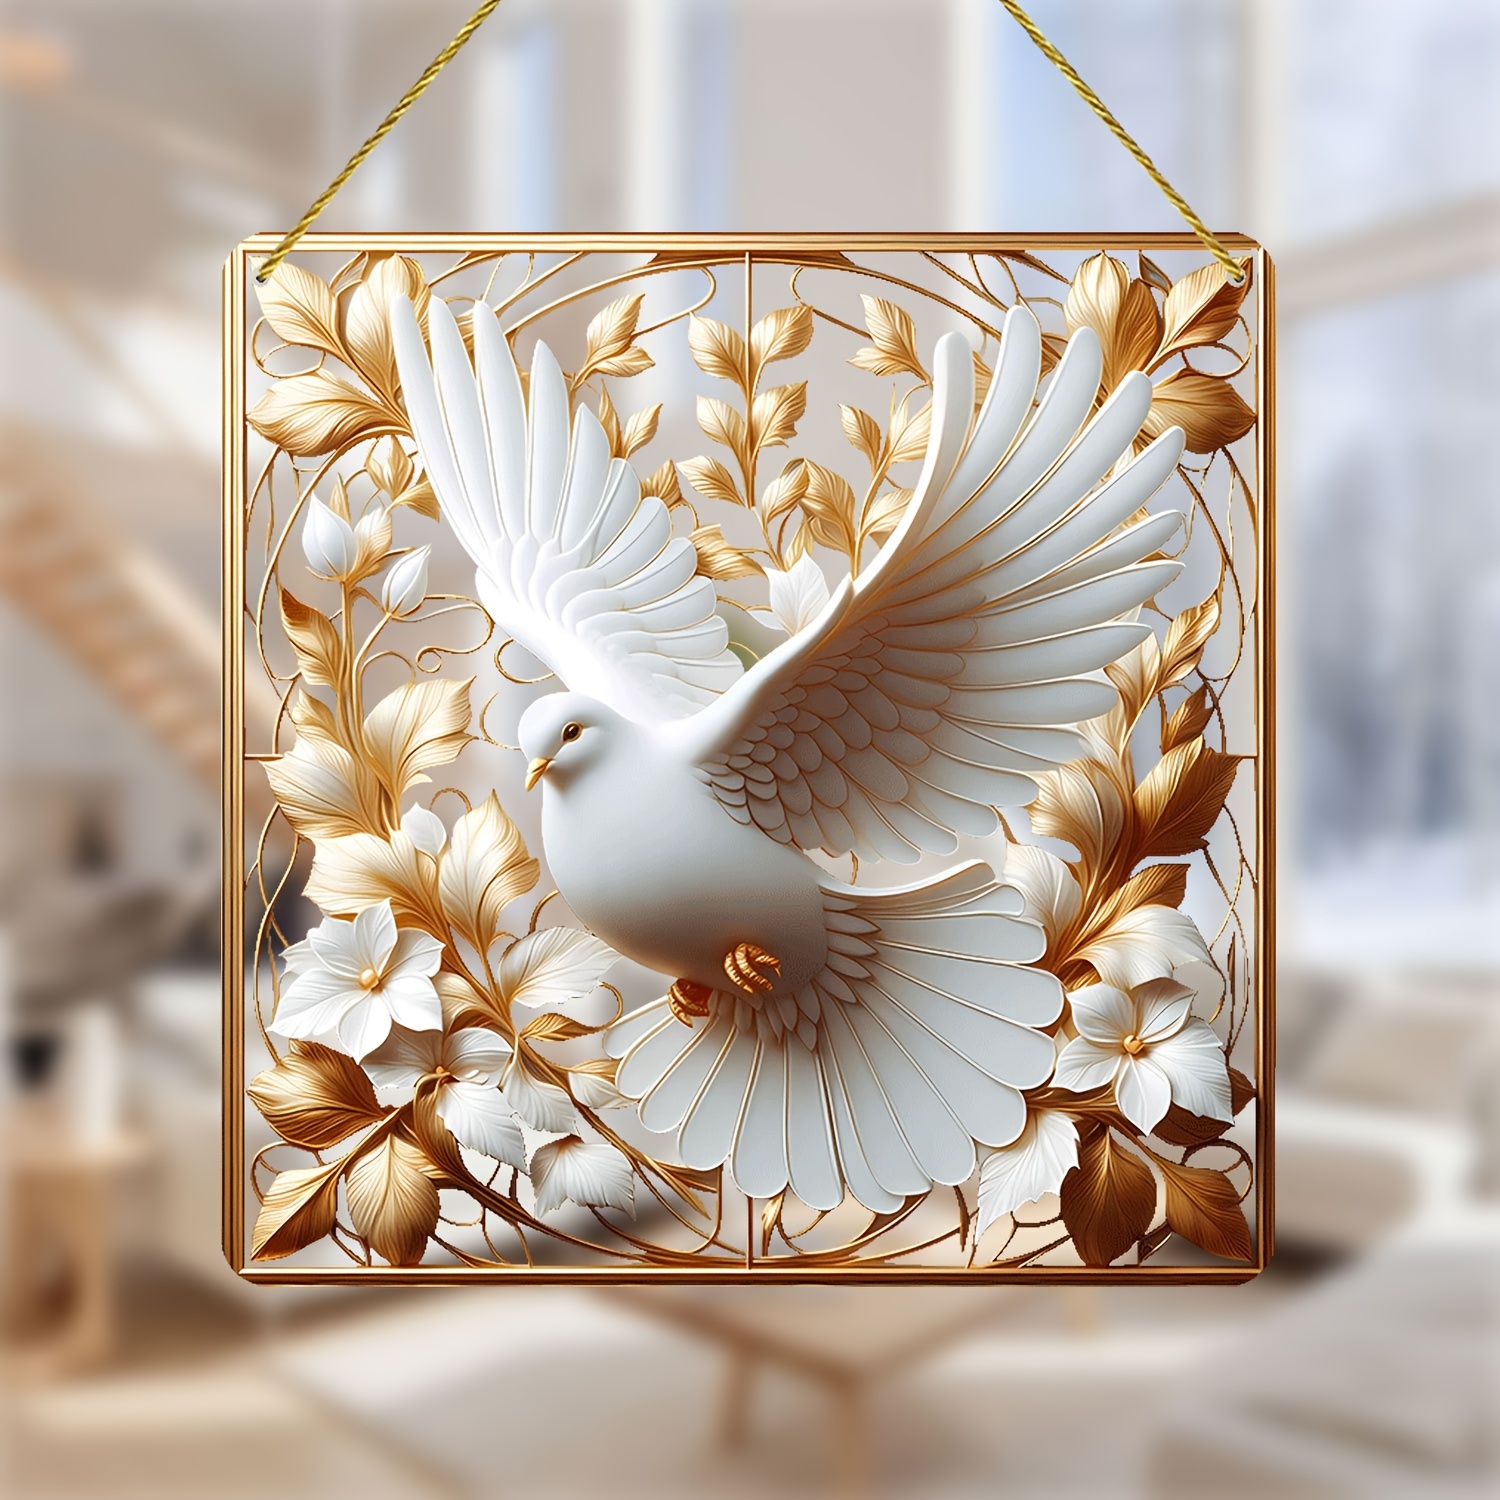 

Acrylic Peace Dove Sun Catcher Wall Art, 8-inch Square Hollow Decorative Plaque For Outdoor Garden Farmhouse, Aesthetic Wall Art For Bedroom Living Room, Ideal Birthday Gift For Friends